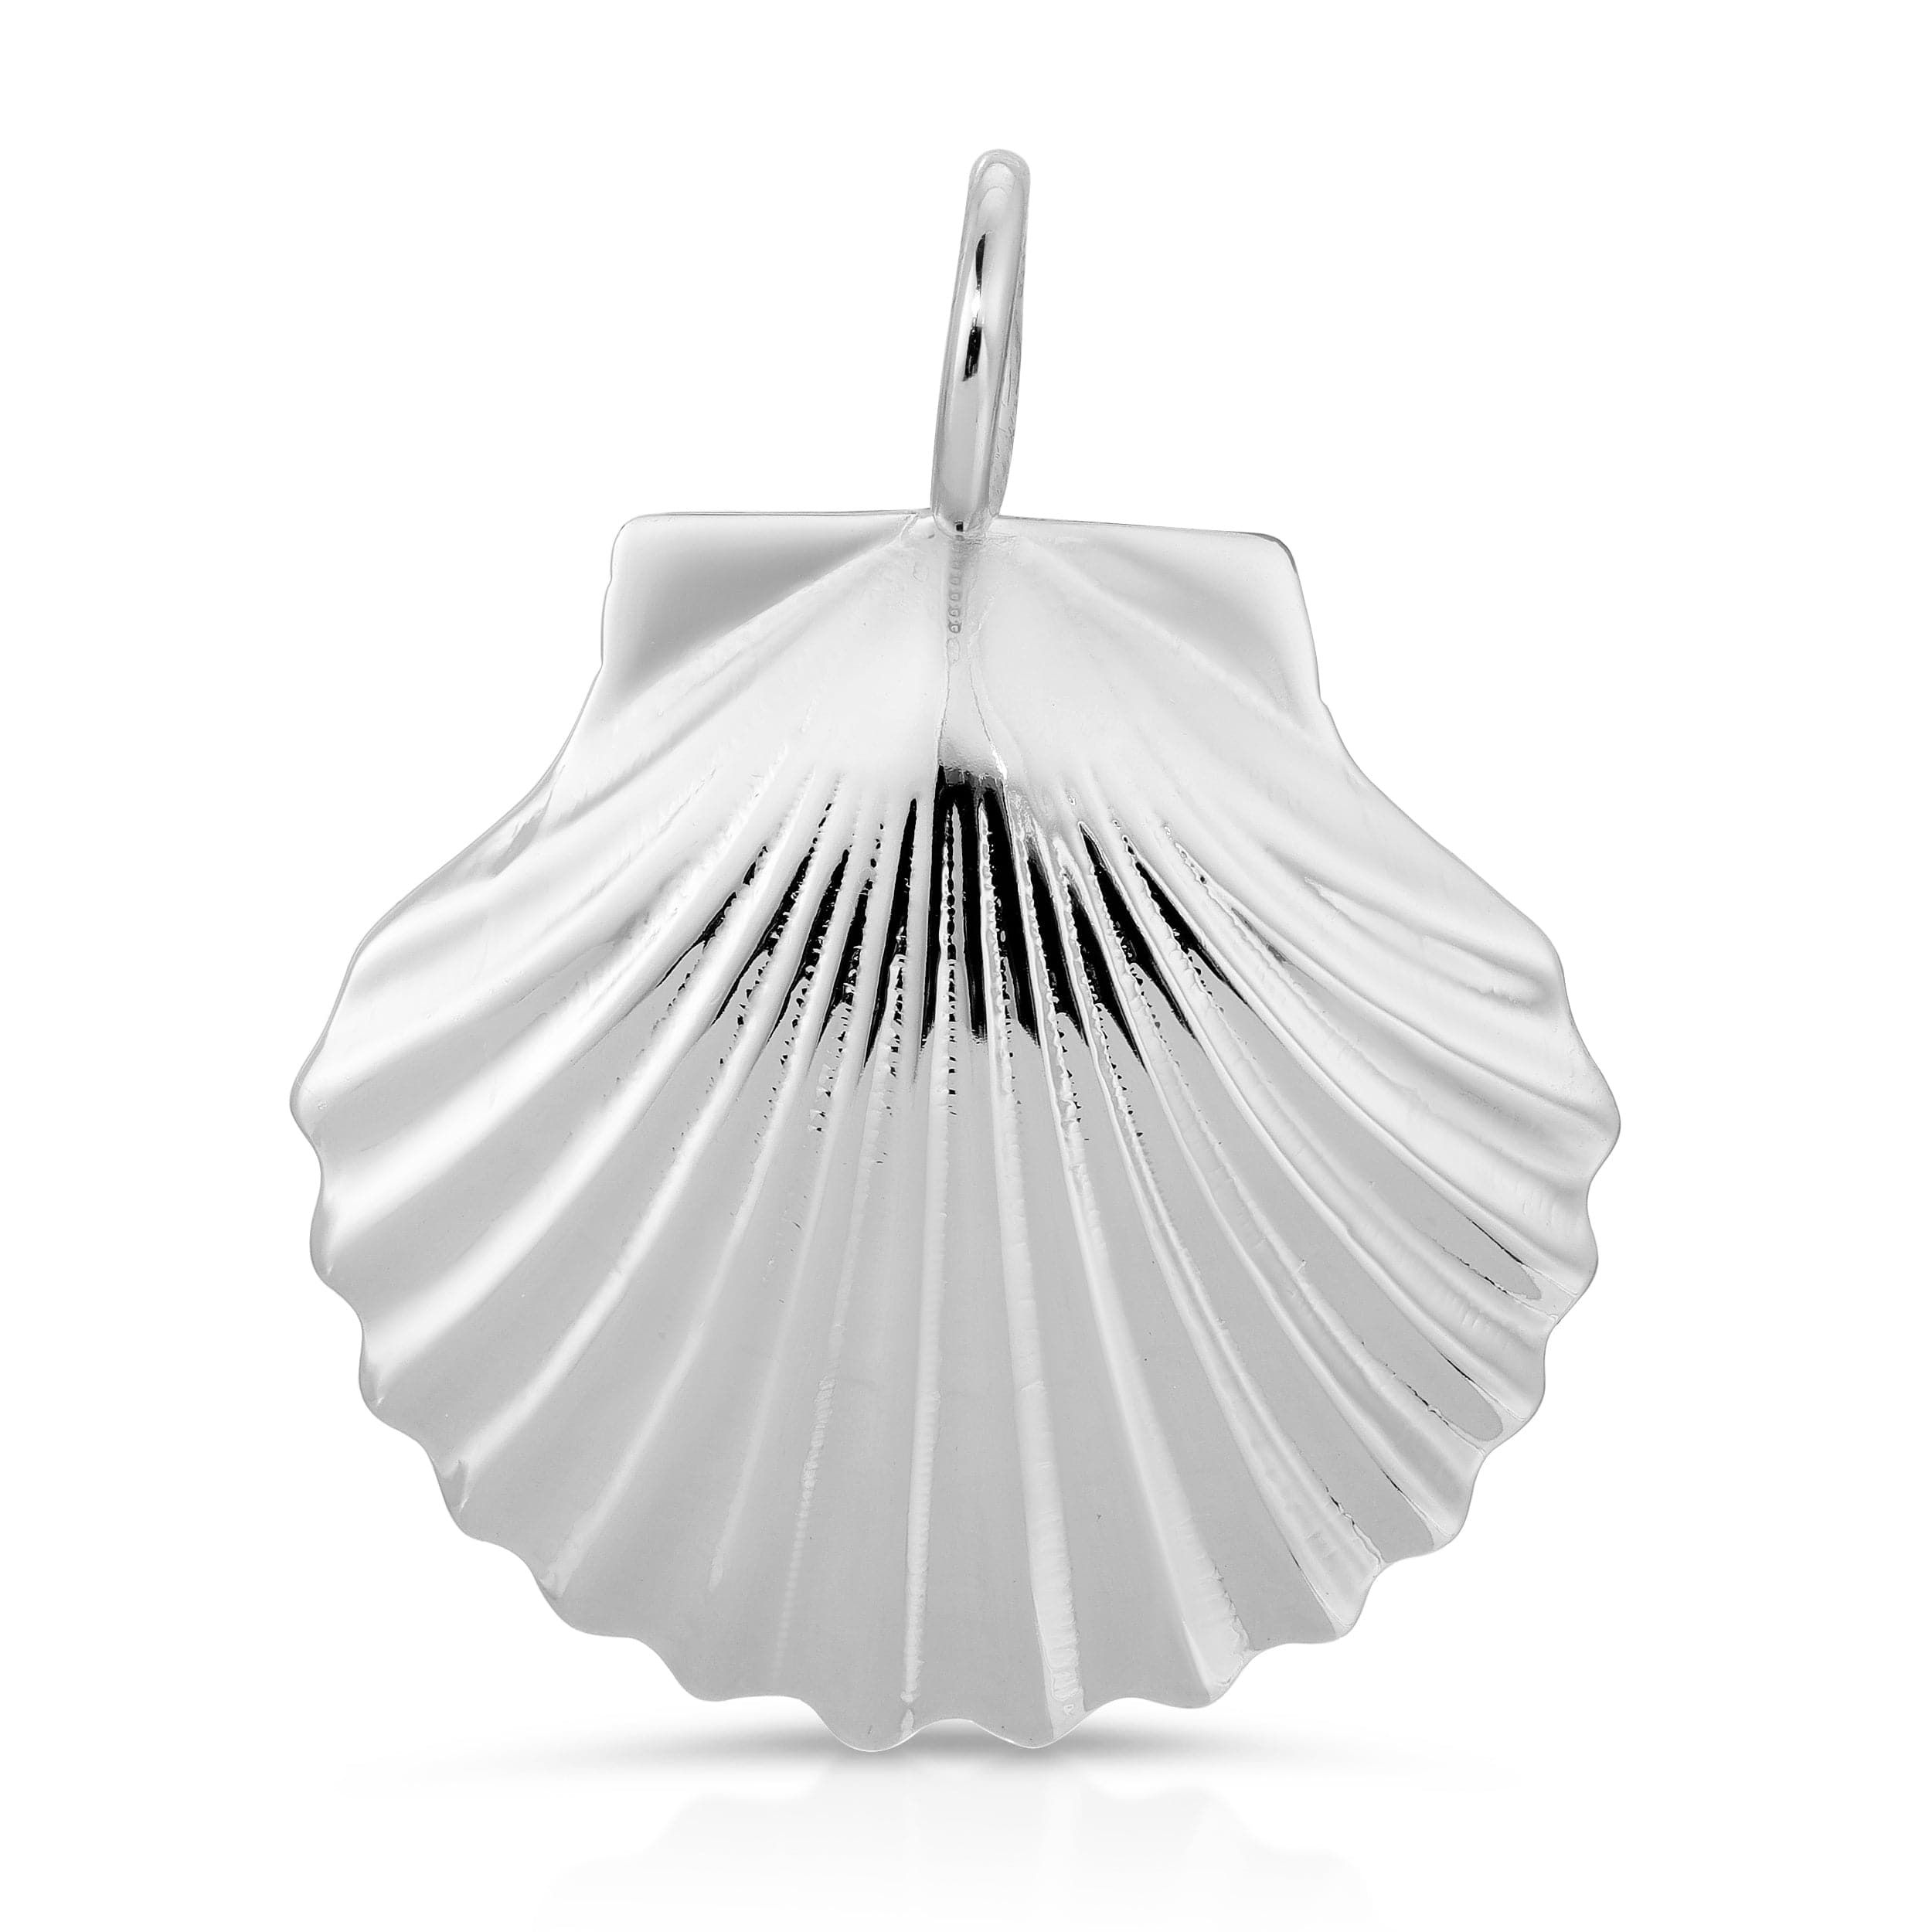 a white shell shaped object on a white background